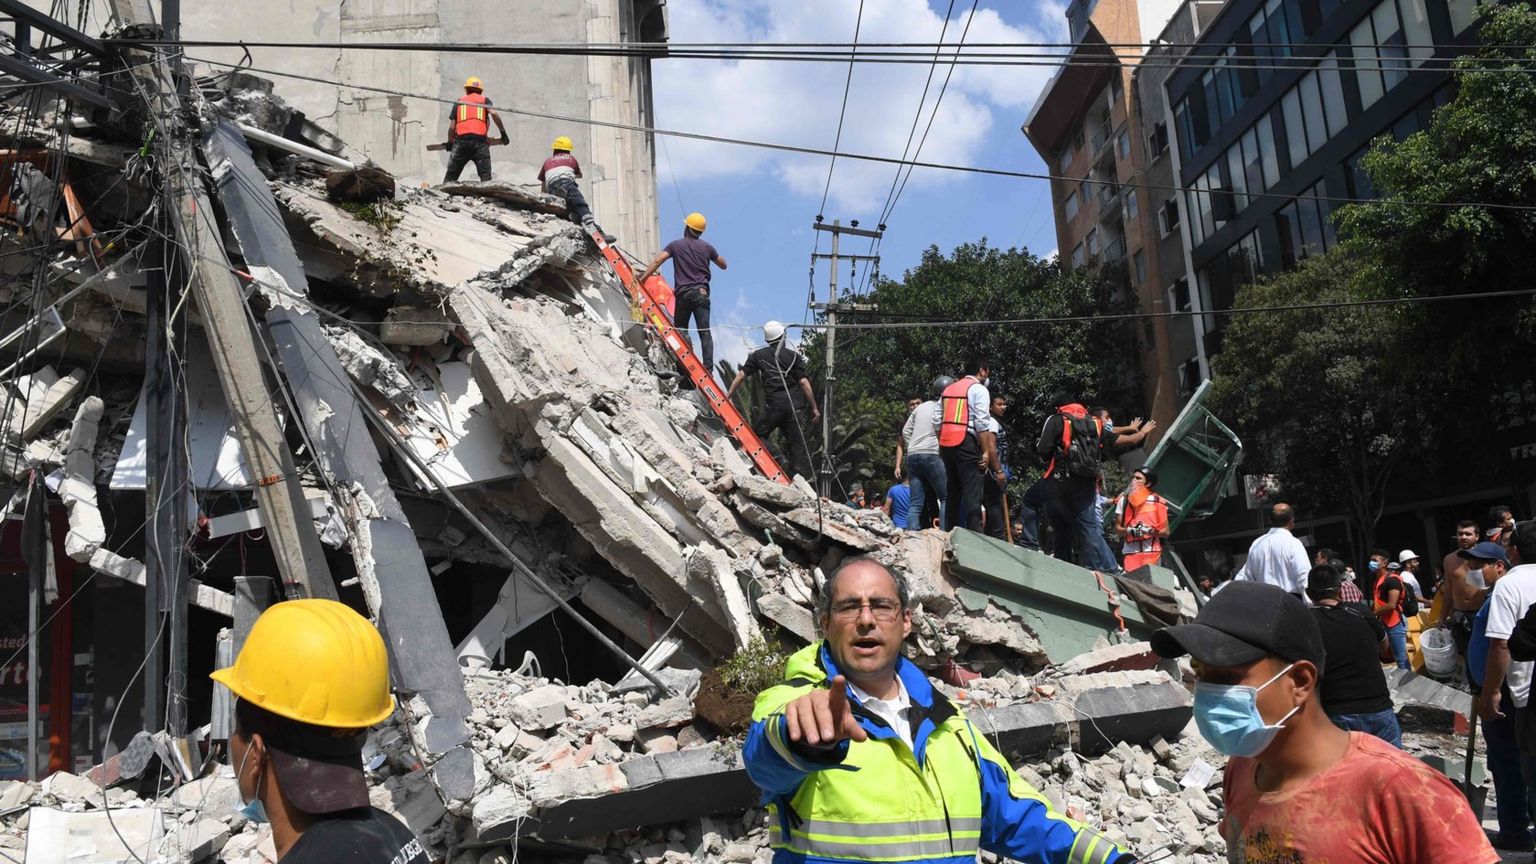 Rescuers search for survivors amid the rubble of a collapsed building in Mexico City on September 19, 2017